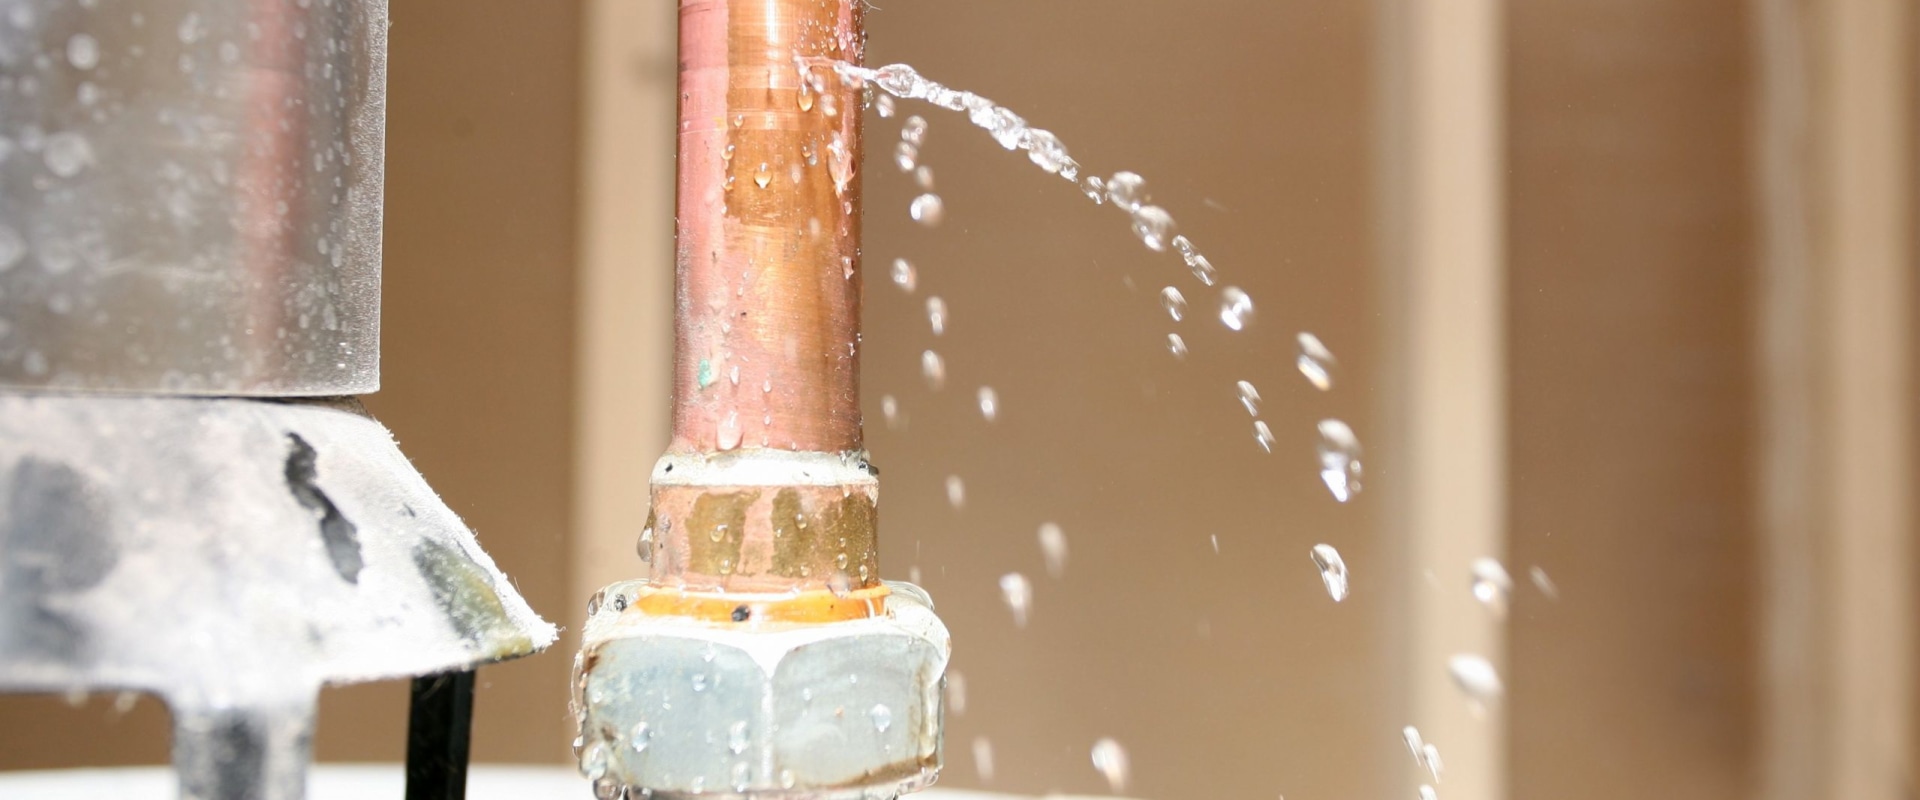 Concrete Water Leakage: What A Plumber Can Do In Adelaide To Prevent Concrete Repair